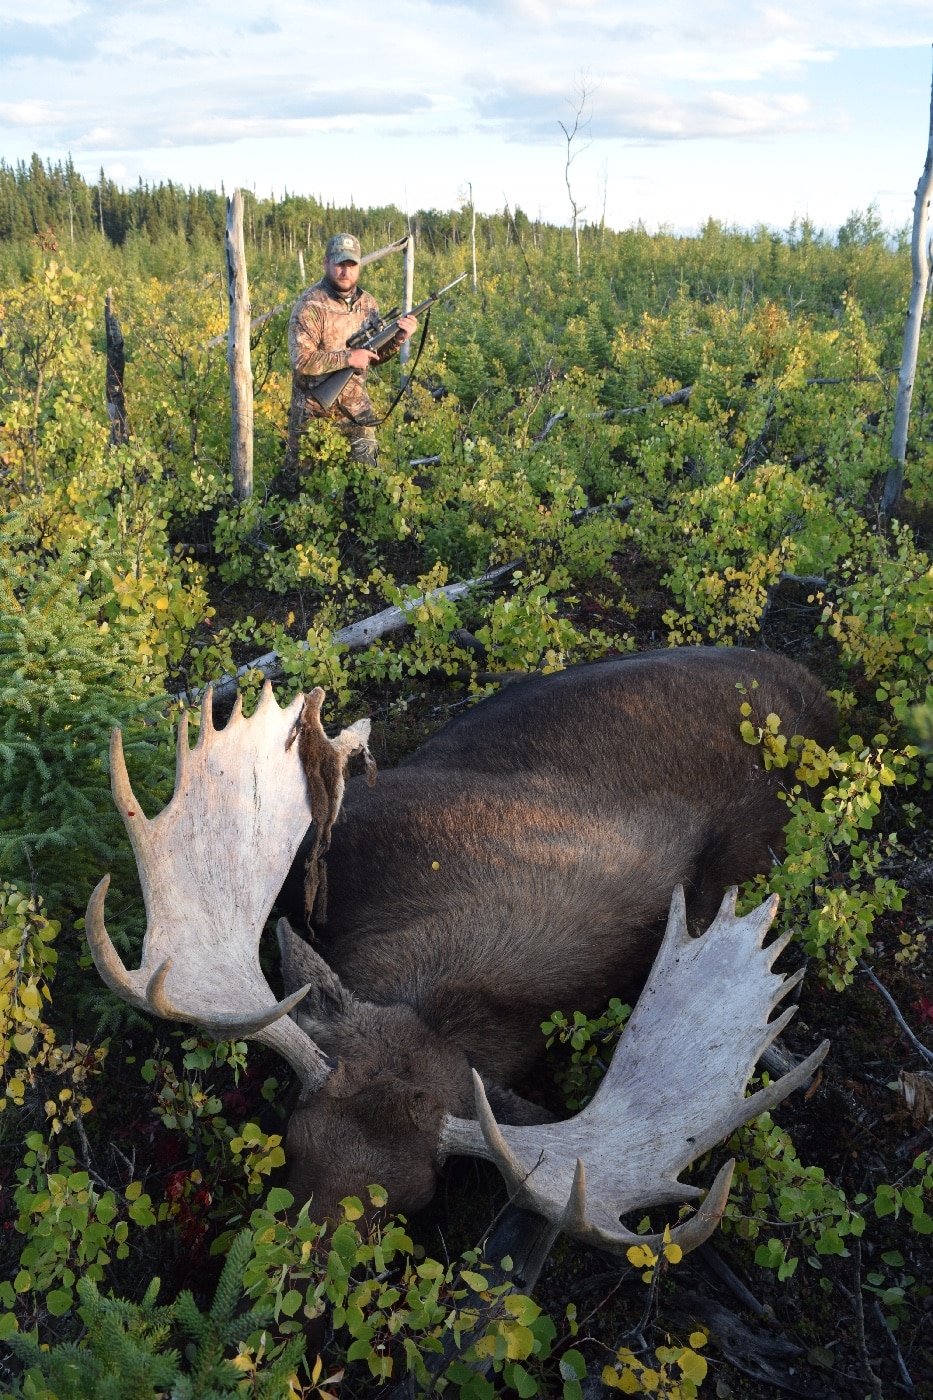 Here we see the author in the field with a dead moose he shot during a hunt. The moose or elk is the world's tallest, largest and heaviest extant species of deer and the only species in the genus Alces. It is also the tallest, and the second-largest, land animal in North America, falling short only of the American bison in body mass.